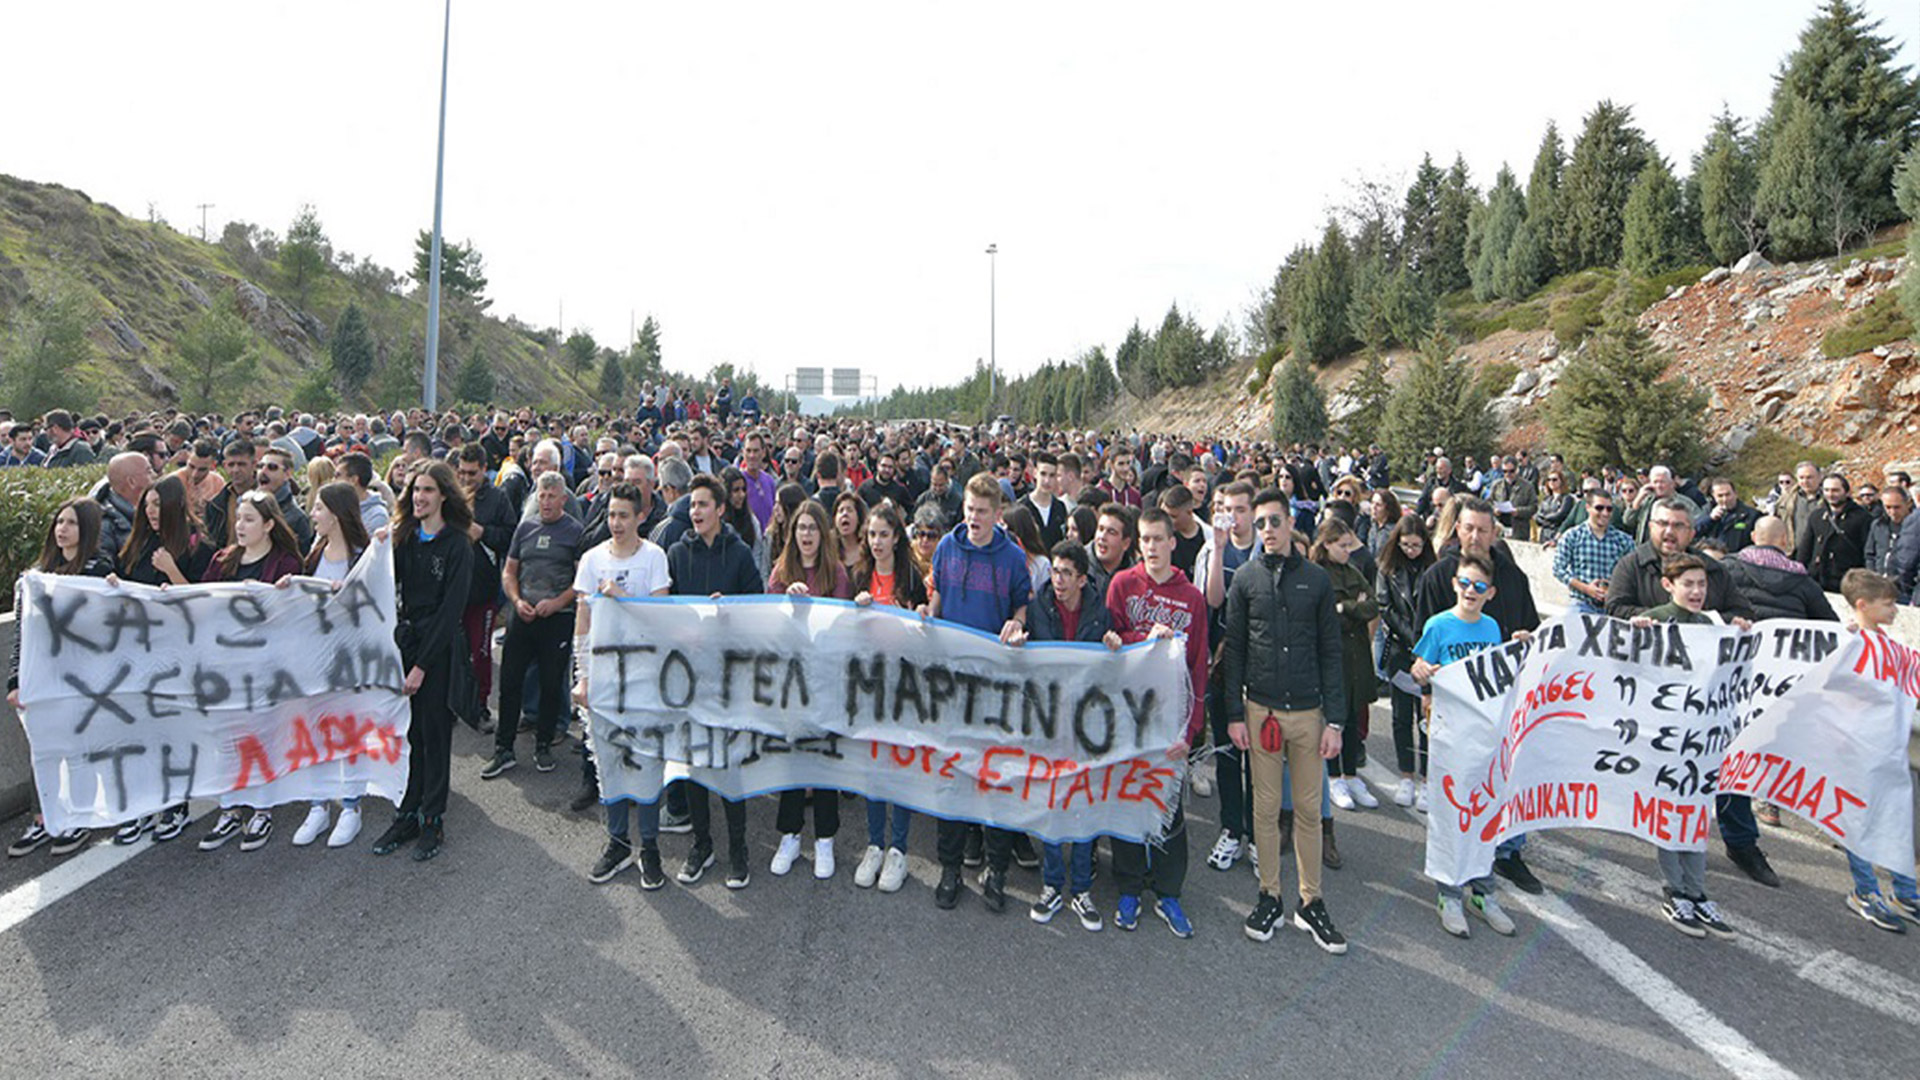 LARCO workers' protest in Greece